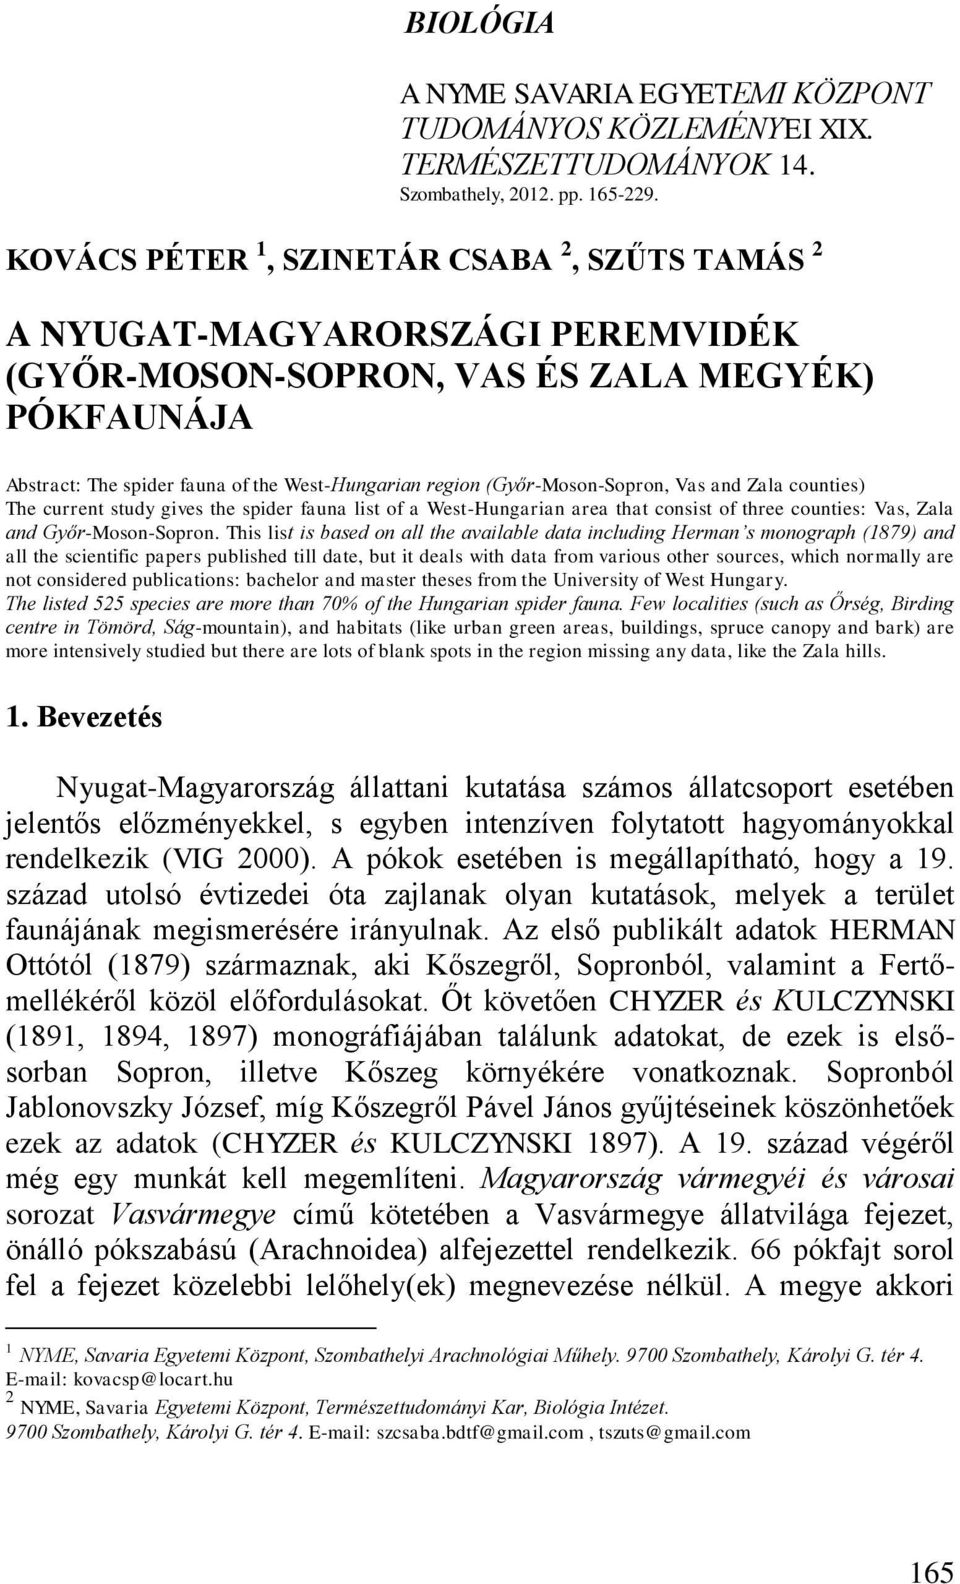 (Győr-Moson-Sopron, Vas and Zala counties) The current study gives the spider fauna list of a West-Hungarian area that consist of three counties: Vas, Zala and Győr-Moson-Sopron.